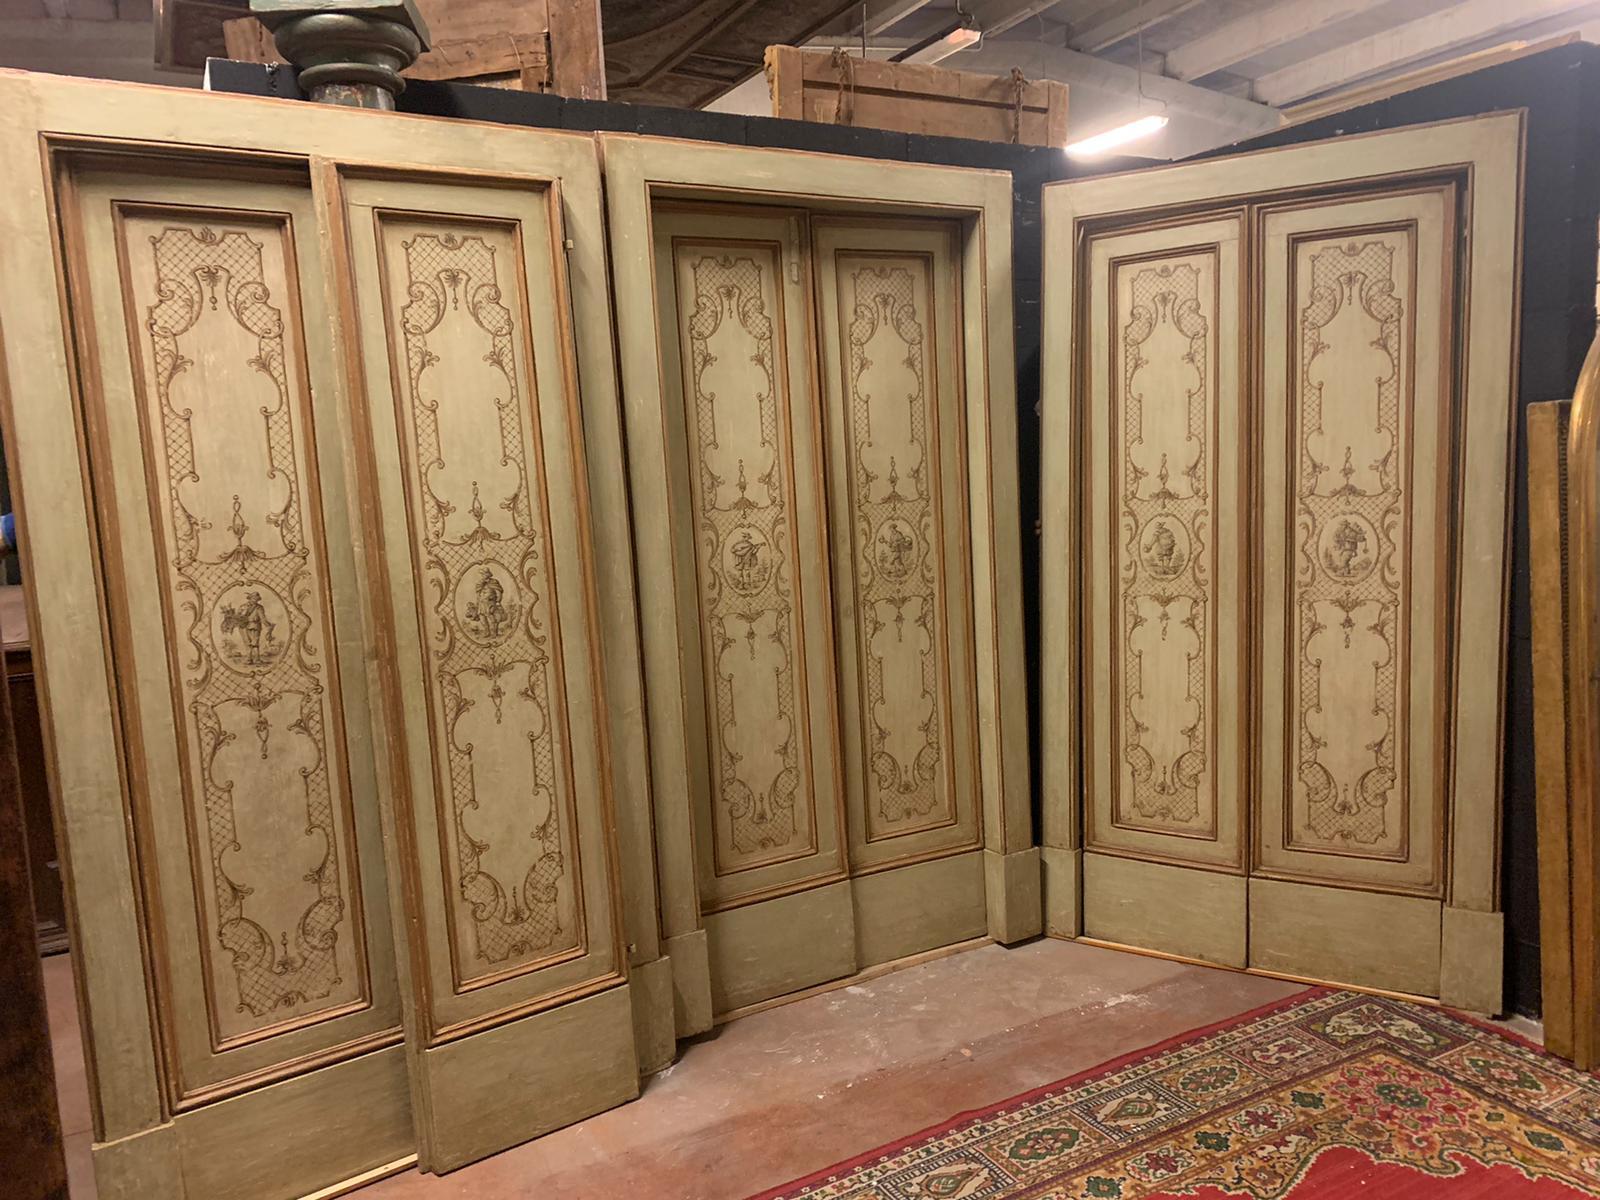 Set of 3 antique interior doors, double-winged and with original frame, lacquered and hand-painted with themes of the period, built entirely by hand in the 18th century, for an important building in Italy.
Beautiful and rare to find in sets of 3,